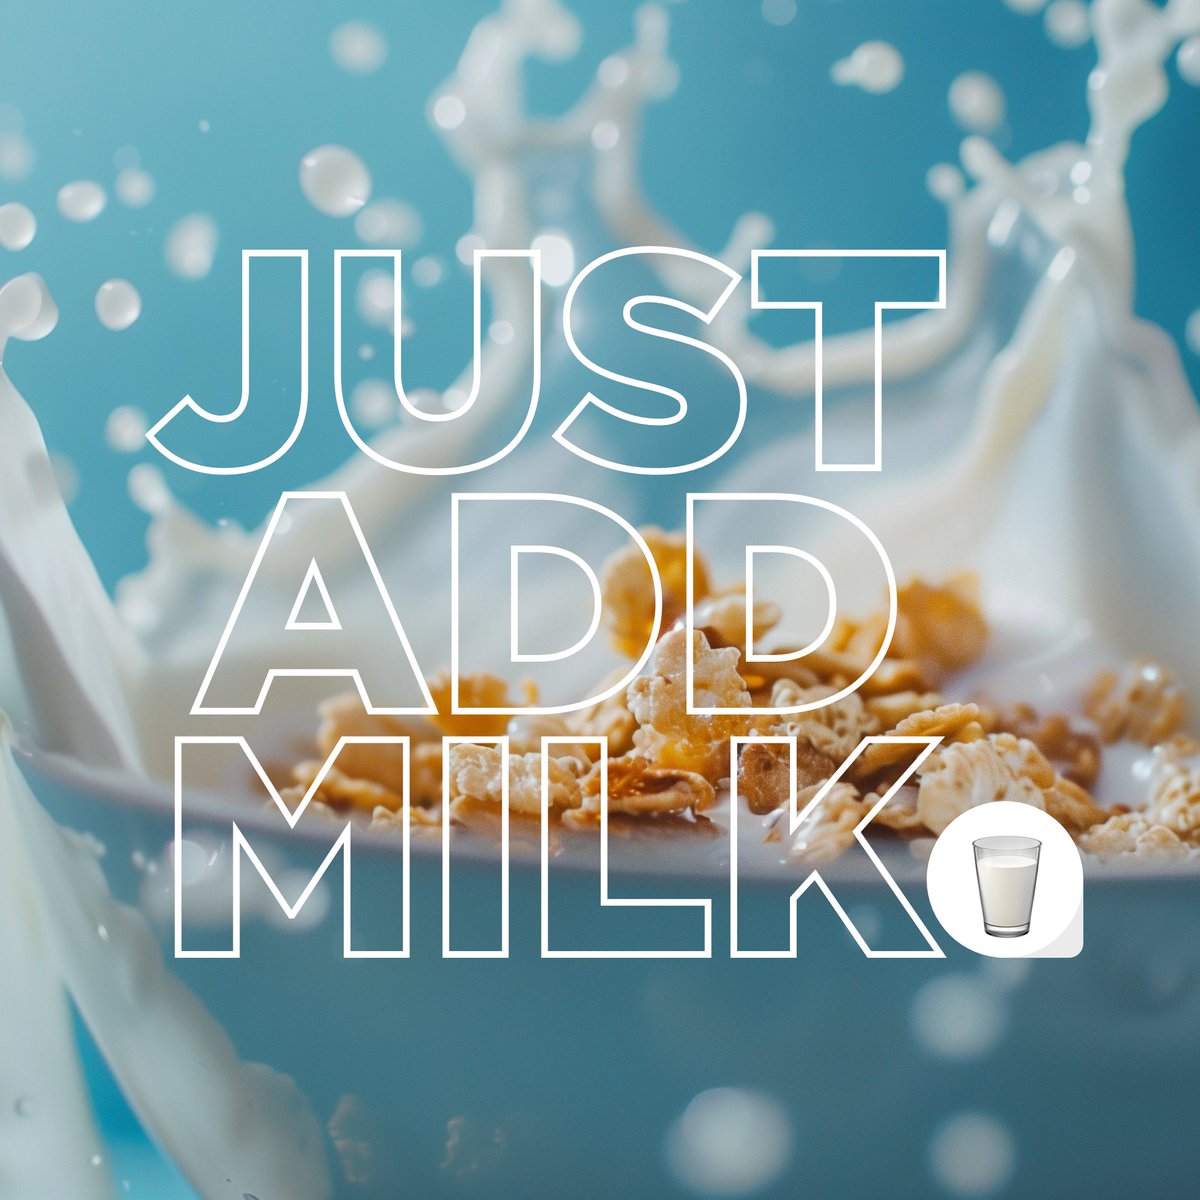 🥛No matter what you’re having for breakfast, lunch or dinner. Milk is the perfect ingredient to add many important nutrients and creamy richness to your meal.
 
#AddMilk #DairyGivesYouGo #EnjoyDairy